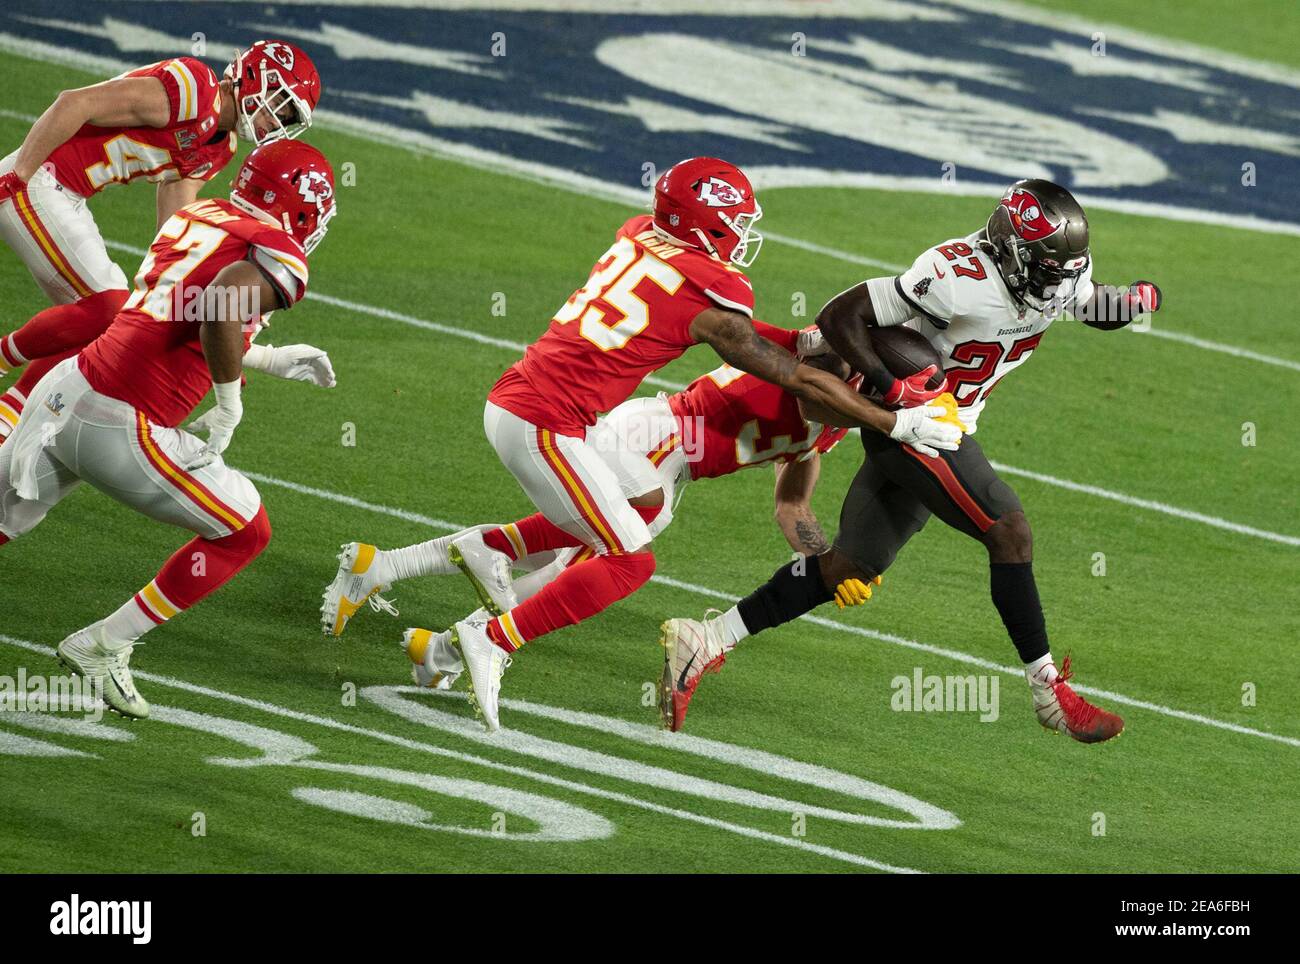 Tampa. 8th Feb, 2021. Ronald Jones (1st R) of Tampa Bay Buccaneers breaks thorugh during the NFL Super Bowl LV football game between Tampa Bay Buccaneers and Kansas City Chiefs in Tampa, Florida, the United States, Feb. 7, 2021. Credit: Xinhua/Alamy Live News Stock Photo